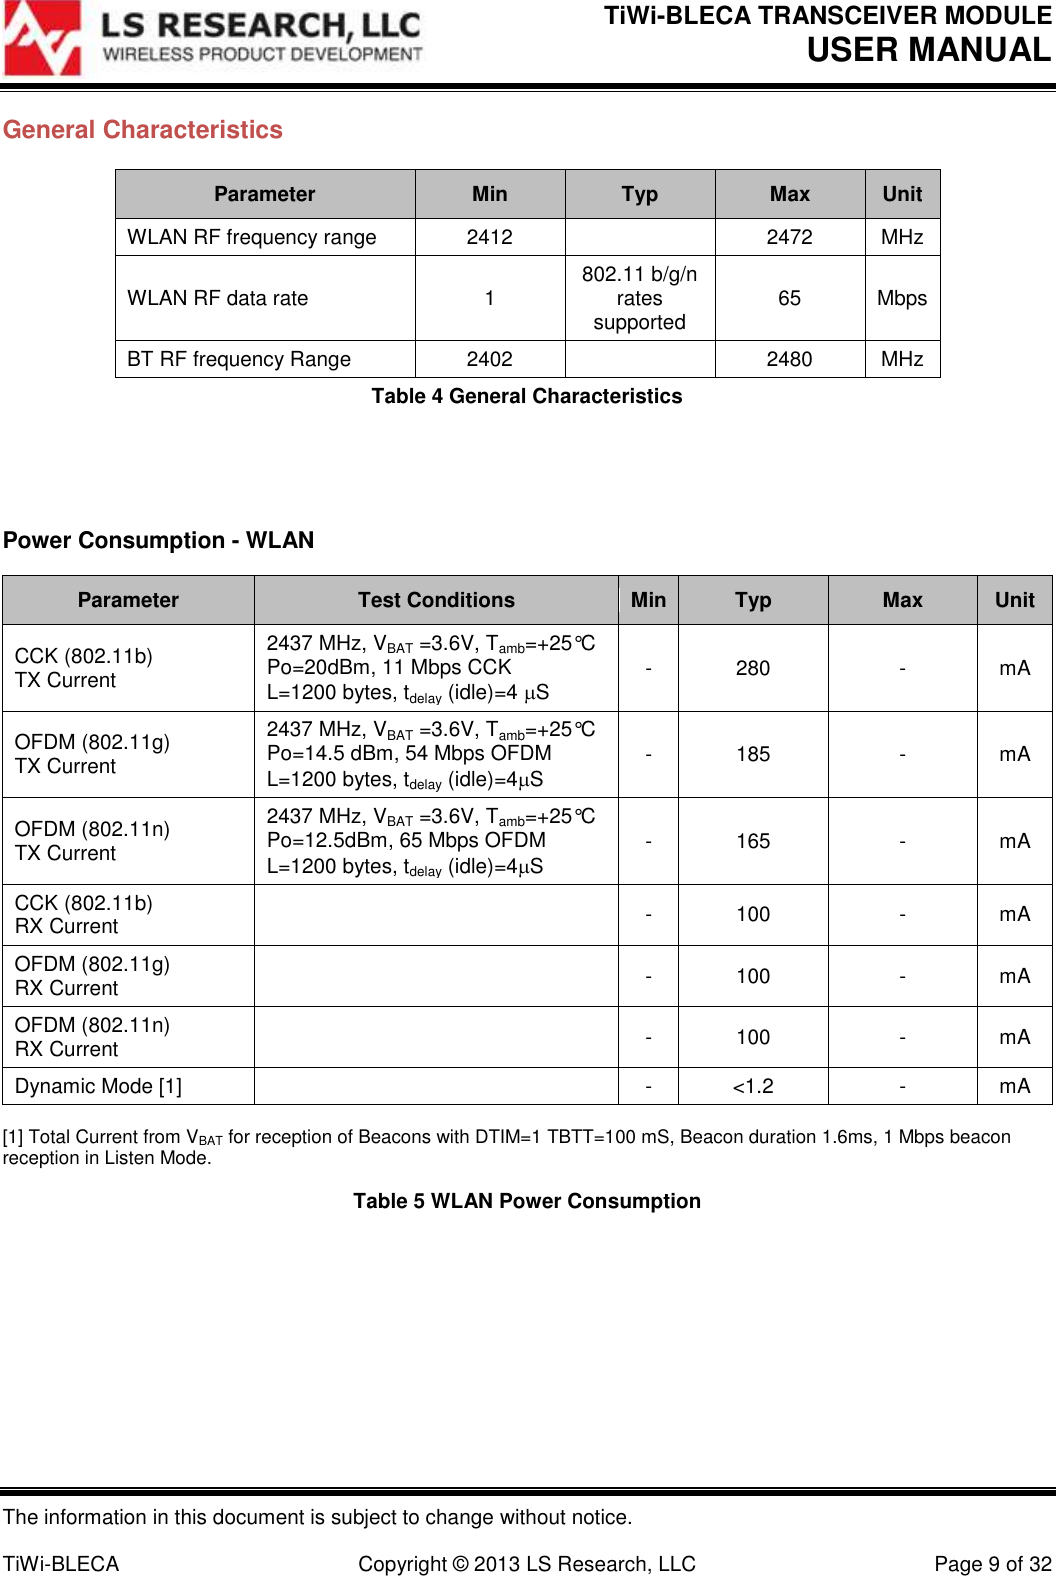 TiWi-BLECA TRANSCEIVER MODULE USER MANUAL   The information in this document is subject to change without notice.  TiWi-BLECA  Copyright © 2013 LS Research, LLC  Page 9 of 32 General Characteristics Parameter Min Typ Max Unit WLAN RF frequency range 2412  2472 MHz WLAN RF data rate 1 802.11 b/g/n rates supported 65 Mbps BT RF frequency Range  2402  2480 MHz Table 4 General Characteristics   Power Consumption - WLAN Parameter Test Conditions Min Typ Max Unit CCK (802.11b) TX Current  2437 MHz, VBAT =3.6V, Tamb=+25°C Po=20dBm, 11 Mbps CCK  L=1200 bytes, tdelay (idle)=4 S - 280 - mA OFDM (802.11g) TX Current 2437 MHz, VBAT =3.6V, Tamb=+25°C Po=14.5 dBm, 54 Mbps OFDM  L=1200 bytes, tdelay (idle)=4S - 185 - mA OFDM (802.11n) TX Current  2437 MHz, VBAT =3.6V, Tamb=+25°C Po=12.5dBm, 65 Mbps OFDM  L=1200 bytes, tdelay (idle)=4S - 165 - mA CCK (802.11b) RX Current   - 100 - mA OFDM (802.11g) RX Current  - 100 - mA OFDM (802.11n) RX Current   - 100 - mA Dynamic Mode [1]   - &lt;1.2 - mA [1] Total Current from VBAT for reception of Beacons with DTIM=1 TBTT=100 mS, Beacon duration 1.6ms, 1 Mbps beacon reception in Listen Mode.  Table 5 WLAN Power Consumption    